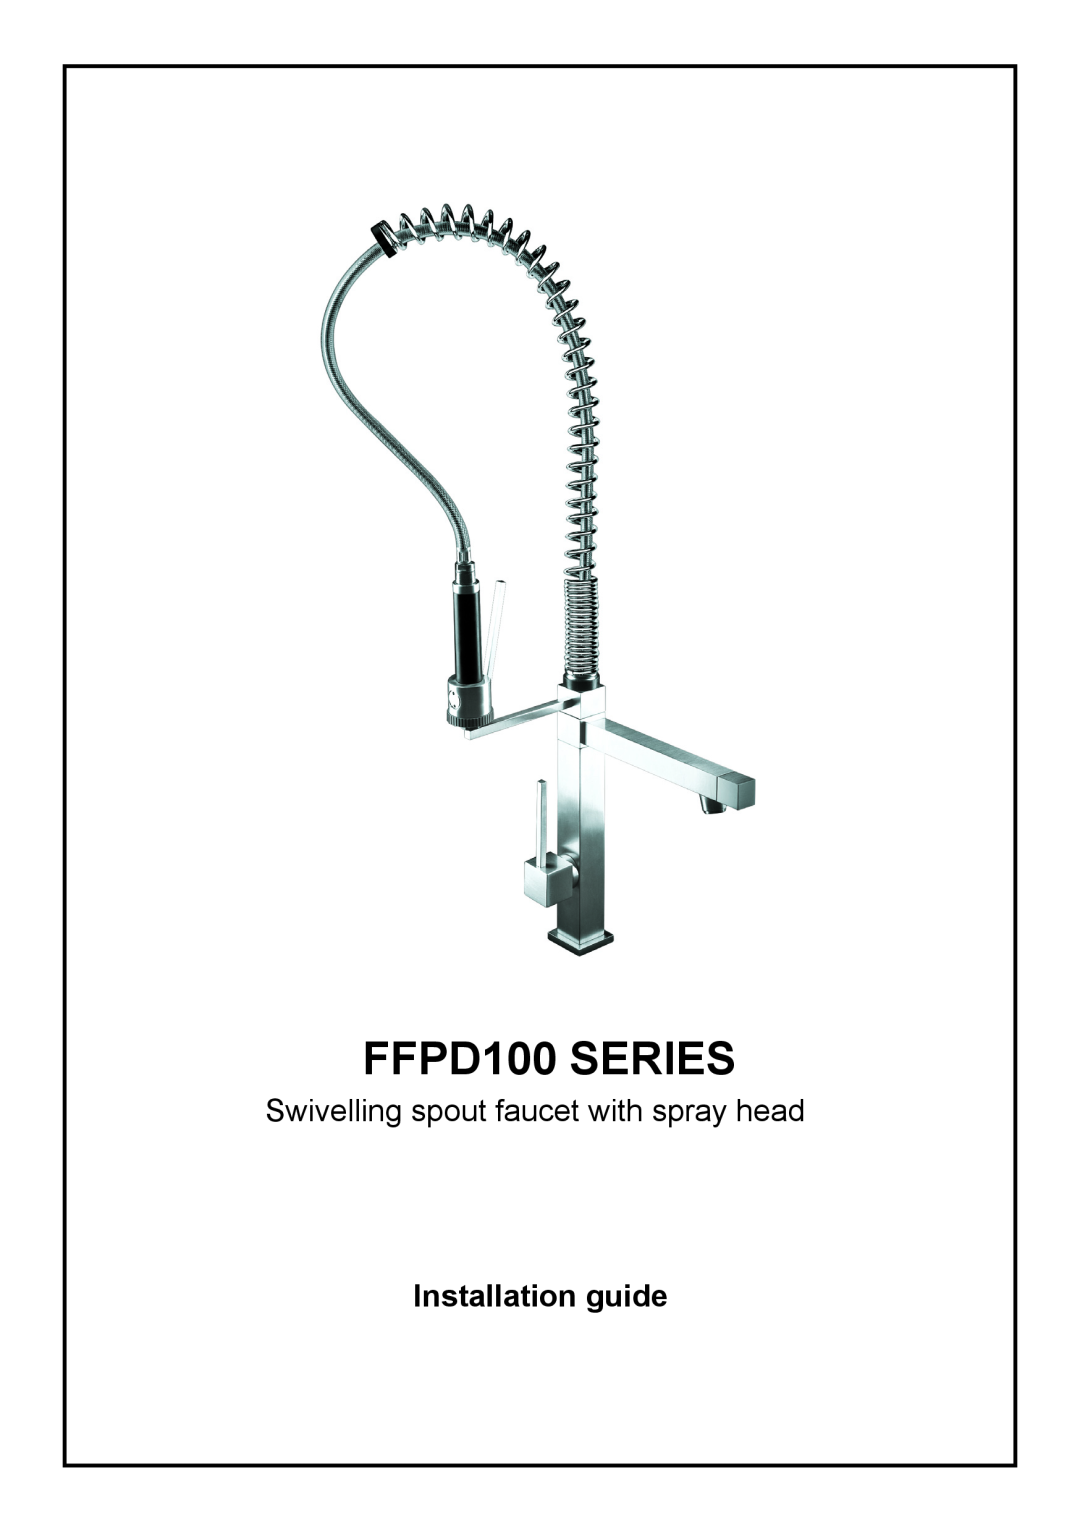 Franke Consumer Products manual FFPD100 SERIES, Swivelling spout faucet with spray head, Installation guide 